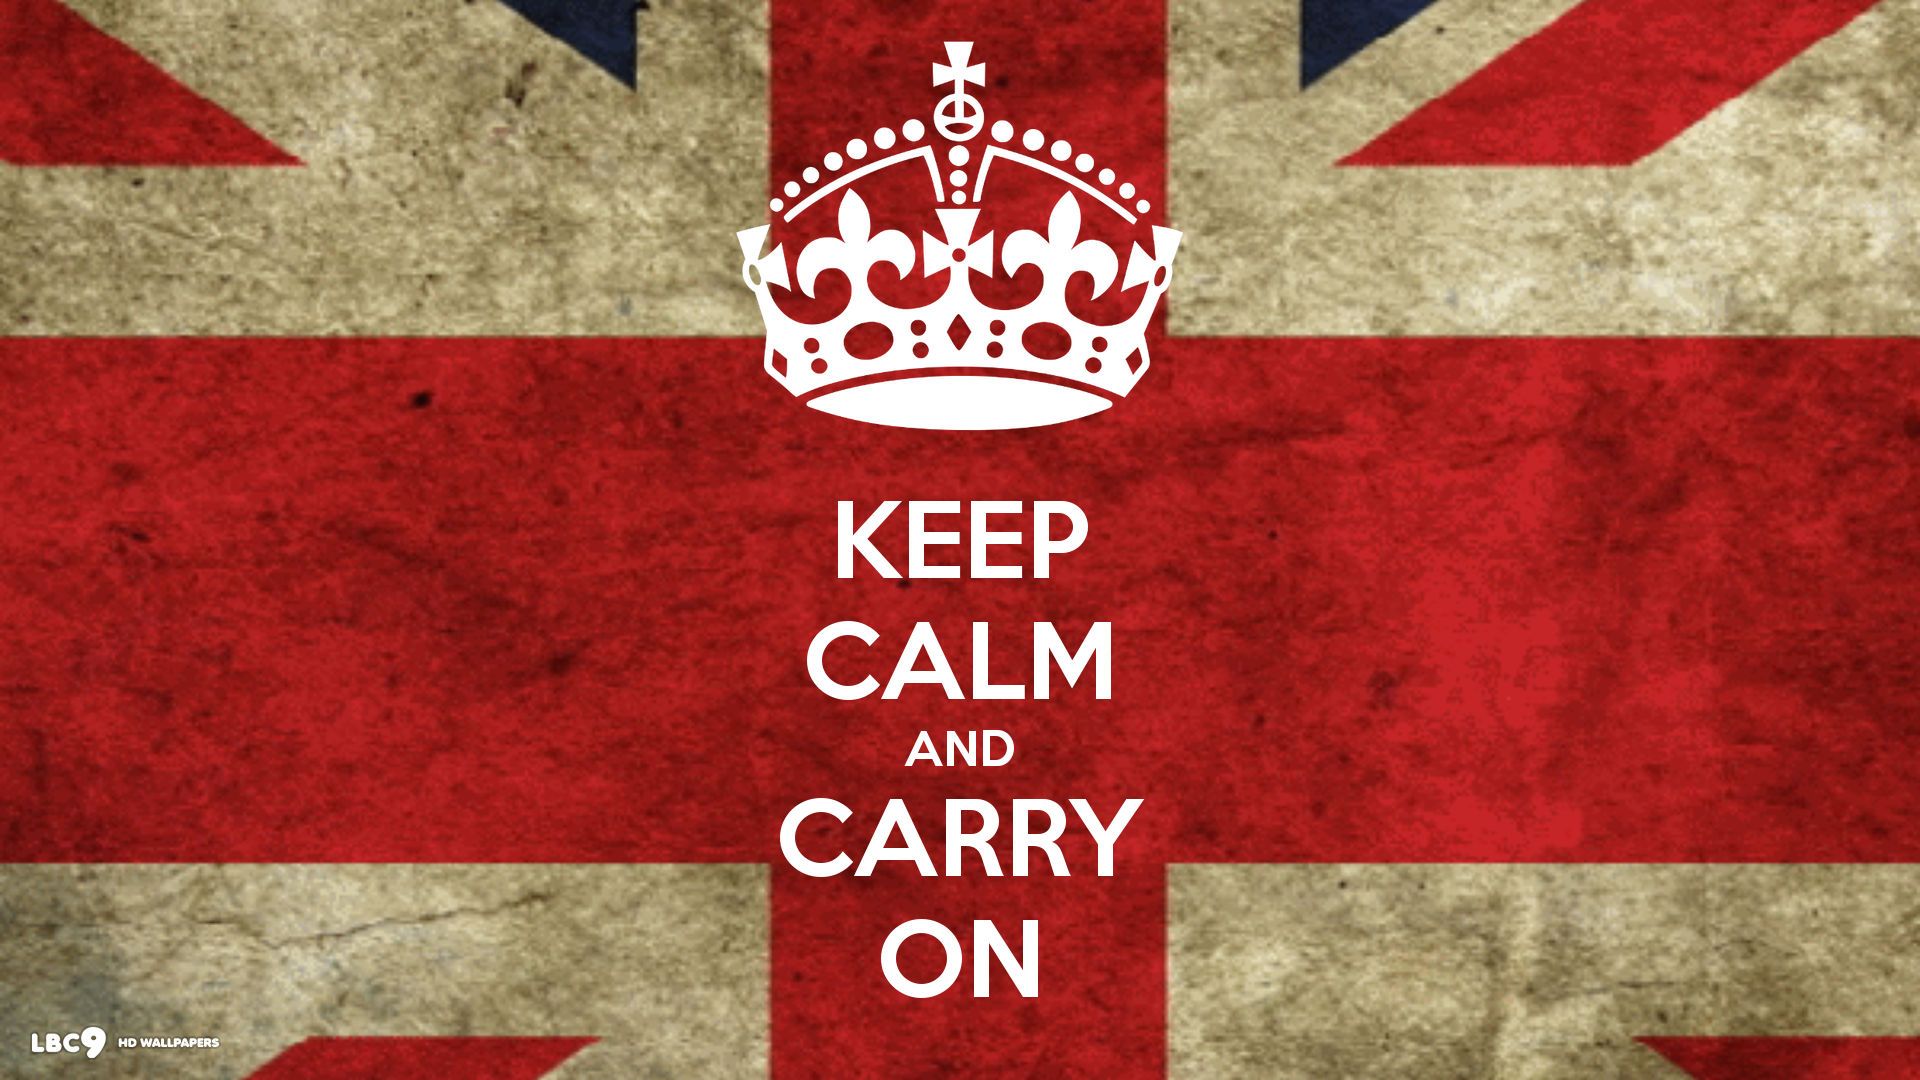 Keep calm and carry on wallpaper 8 / 25 typography hd backgrounds